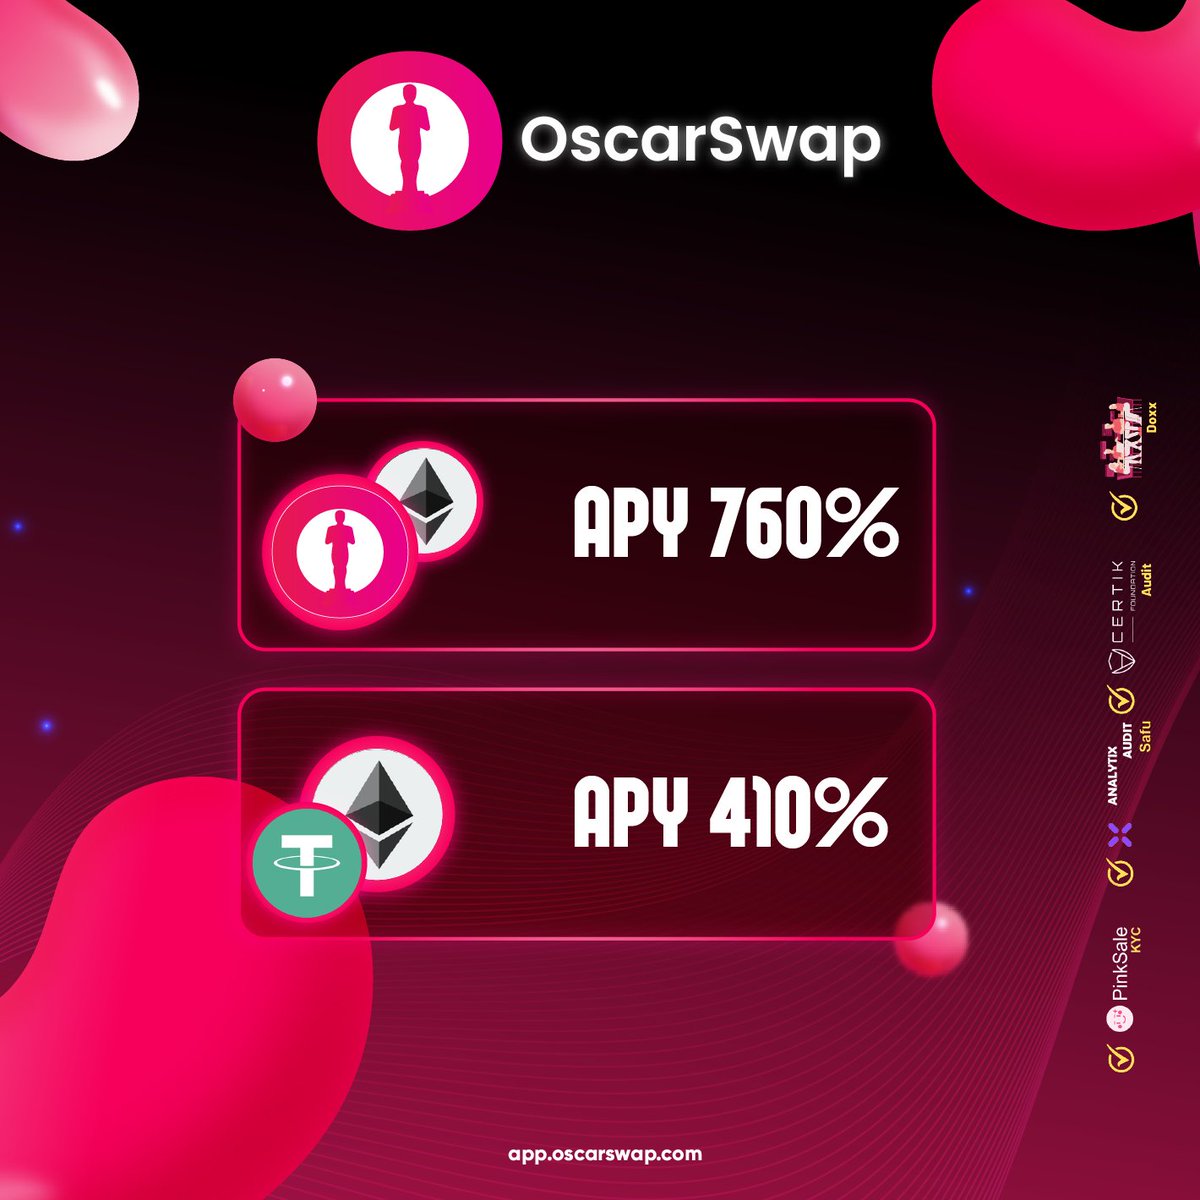 💰$OSCAR Farming Pools Coming Soon on ETH Chain.

💰Farms Will be live after presale ends

💰Earn Massive rewards

1. Oscar-ETH - 760% APY
2. USDT-ETH - 410% APY

🌐app.oscarswap.com

#OSCARSWAP #OSCAR #ETH #USDT #Farming #Staking #Rewards